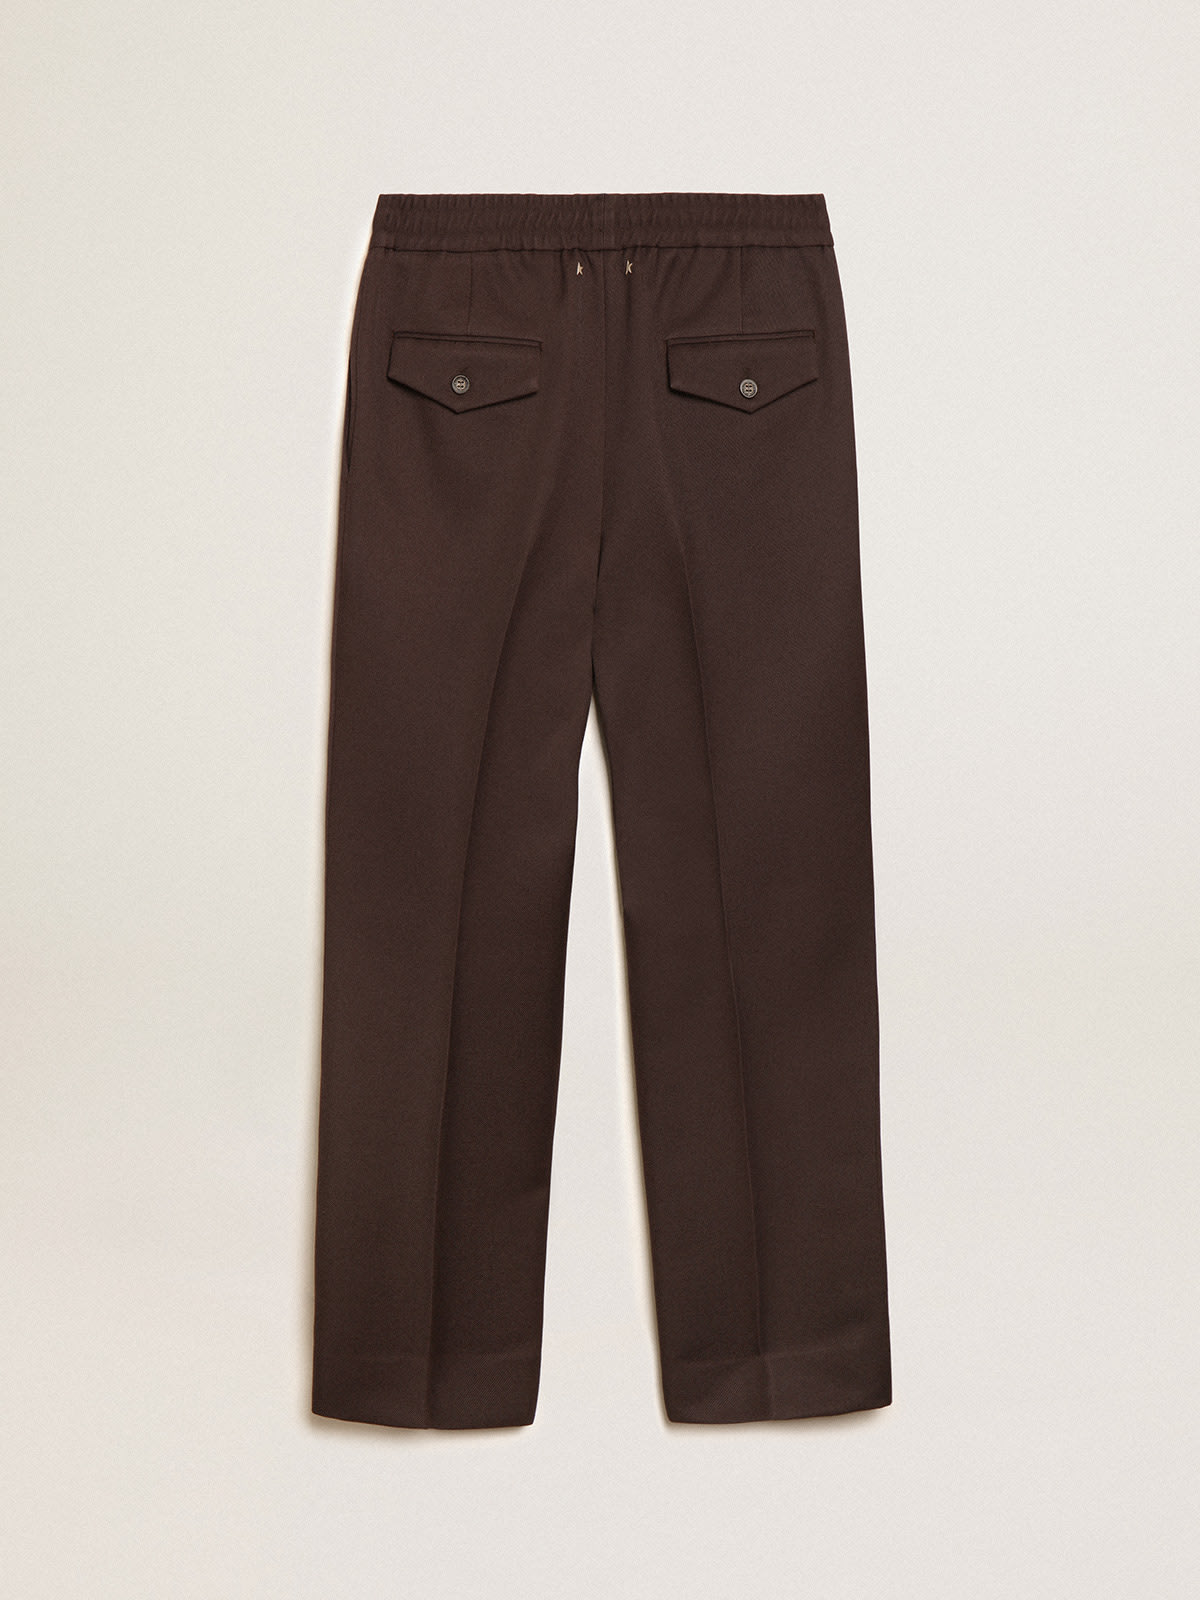 Licorice-colored Journey Collection wide-leg jogging pants | Golden Goose